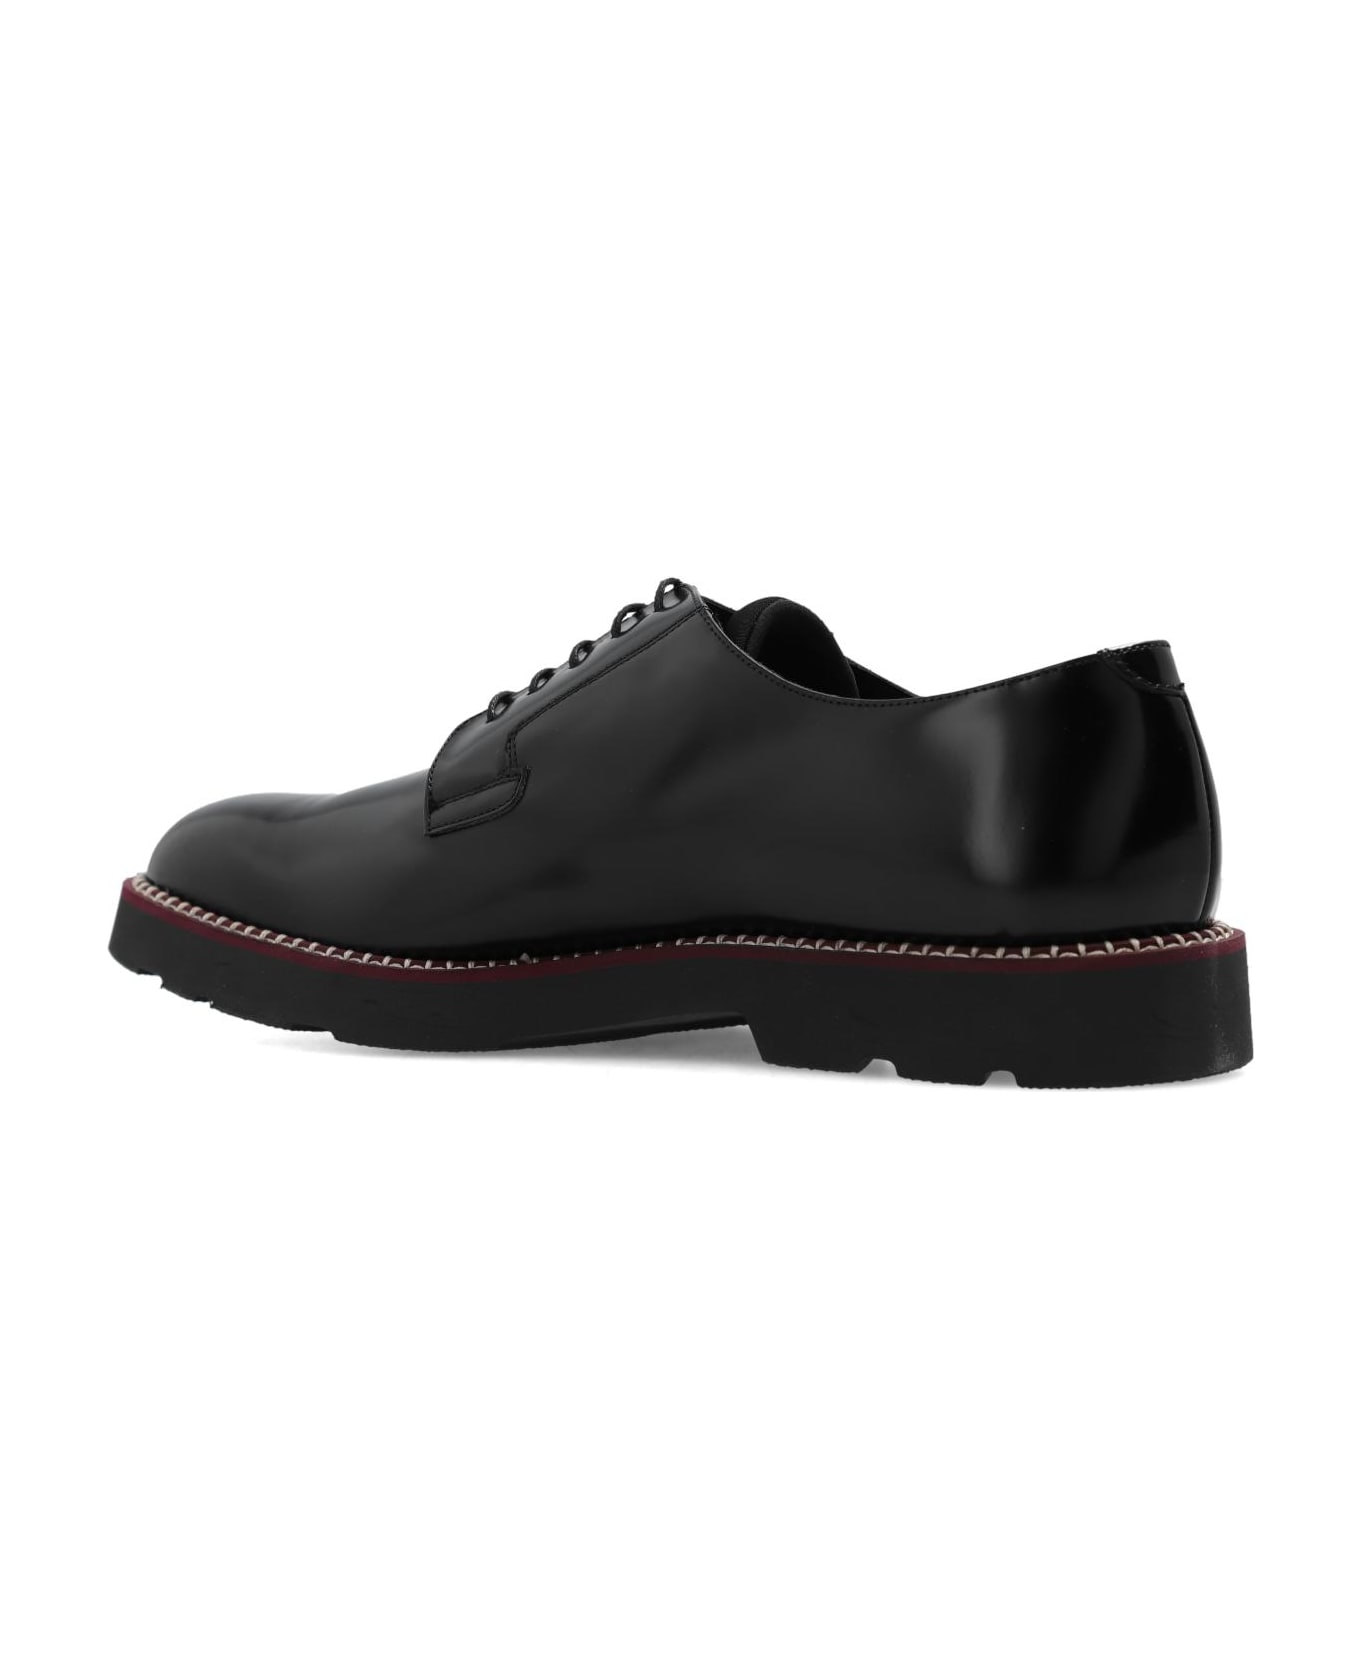 Paul Smith 'ras' Leather Shoes - BLACK